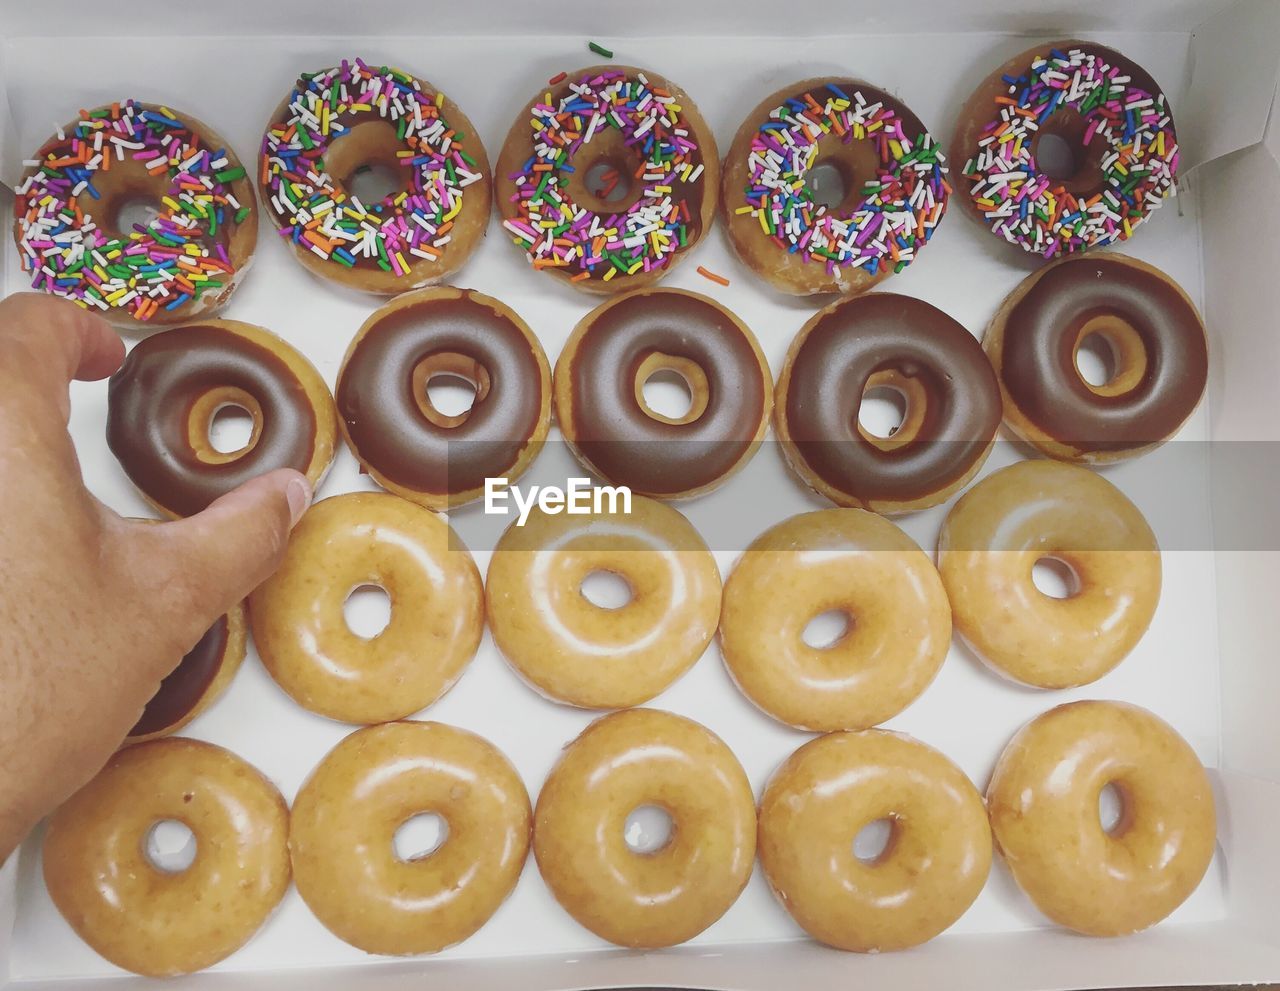 Cropped hand removing donut from box